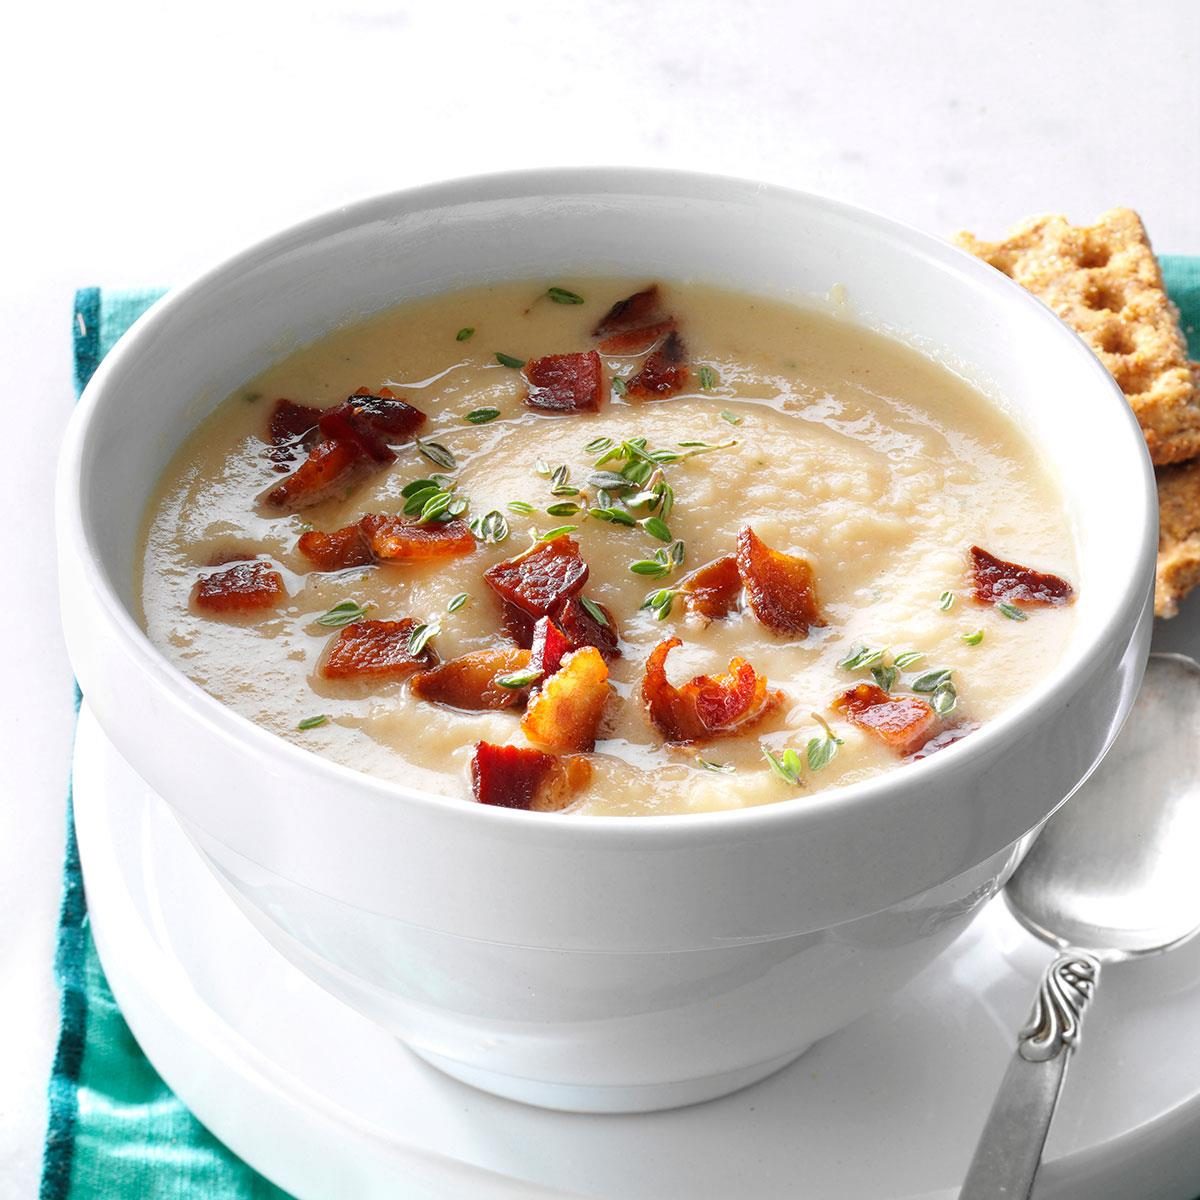 Creamy Root Veggie Soup Recipe: How to Make It